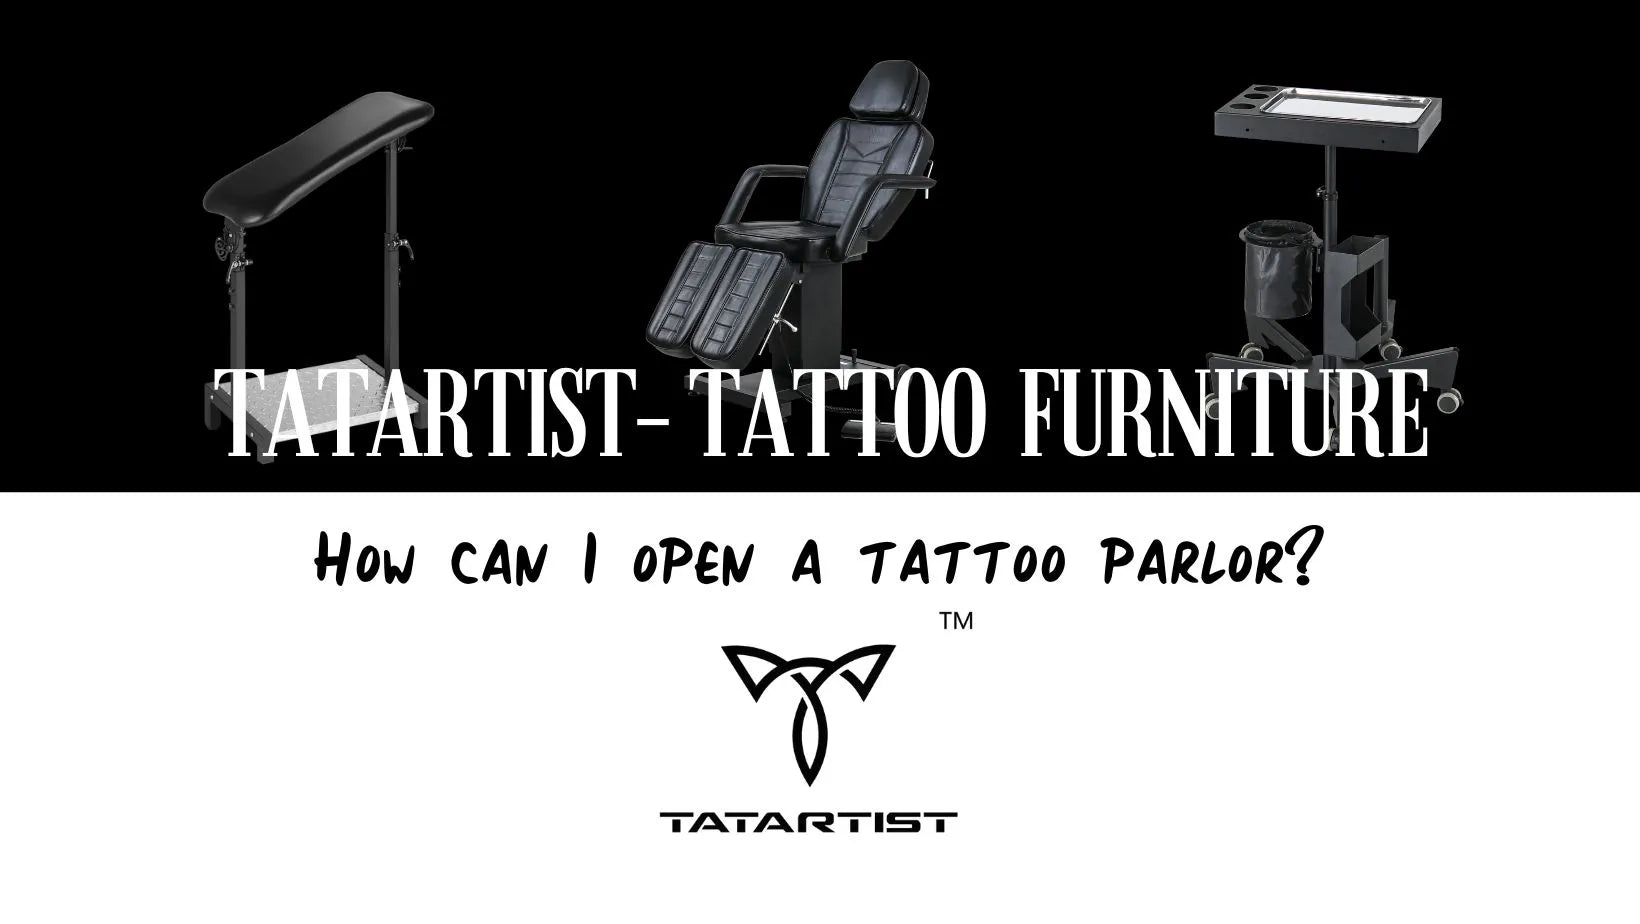 How can I open a tattoo parlor?